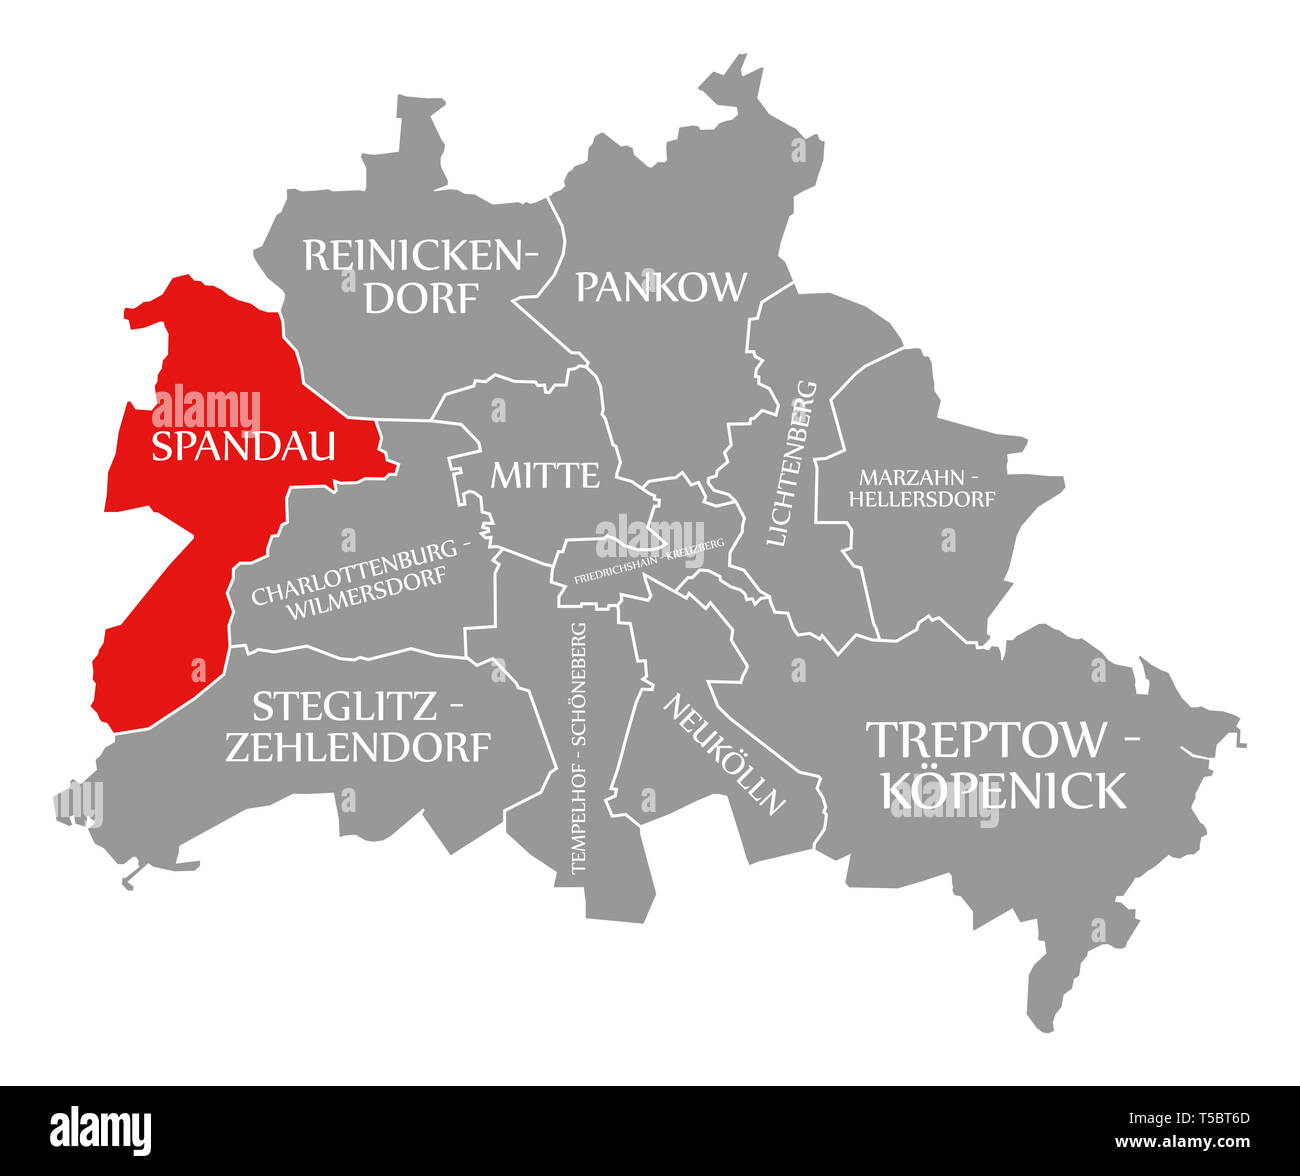 Spandau city district red highlighted in map of Berlin Germany Stock Photo